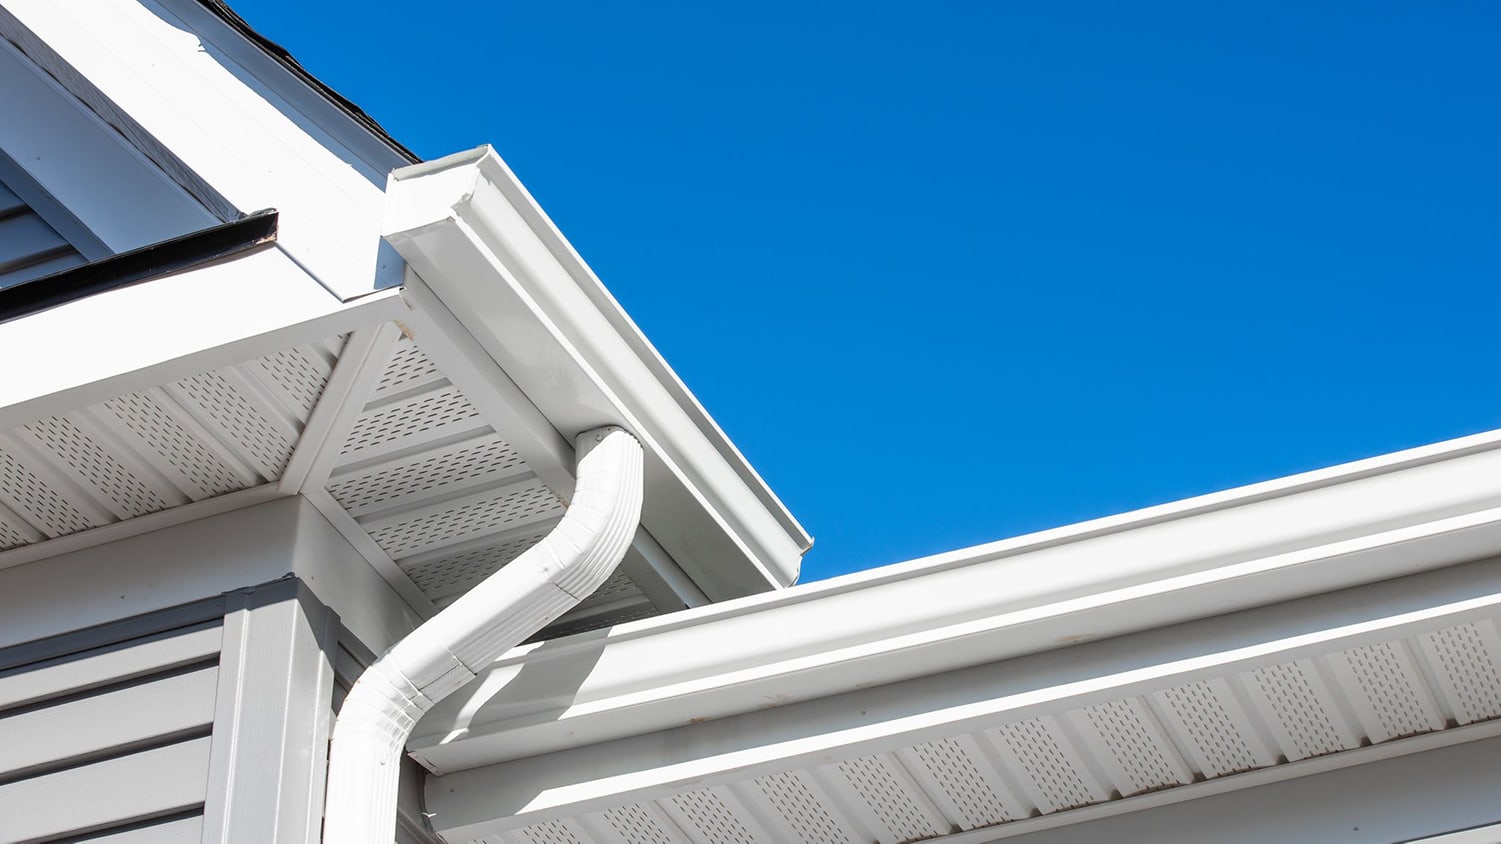 under view of gutter system on residential home